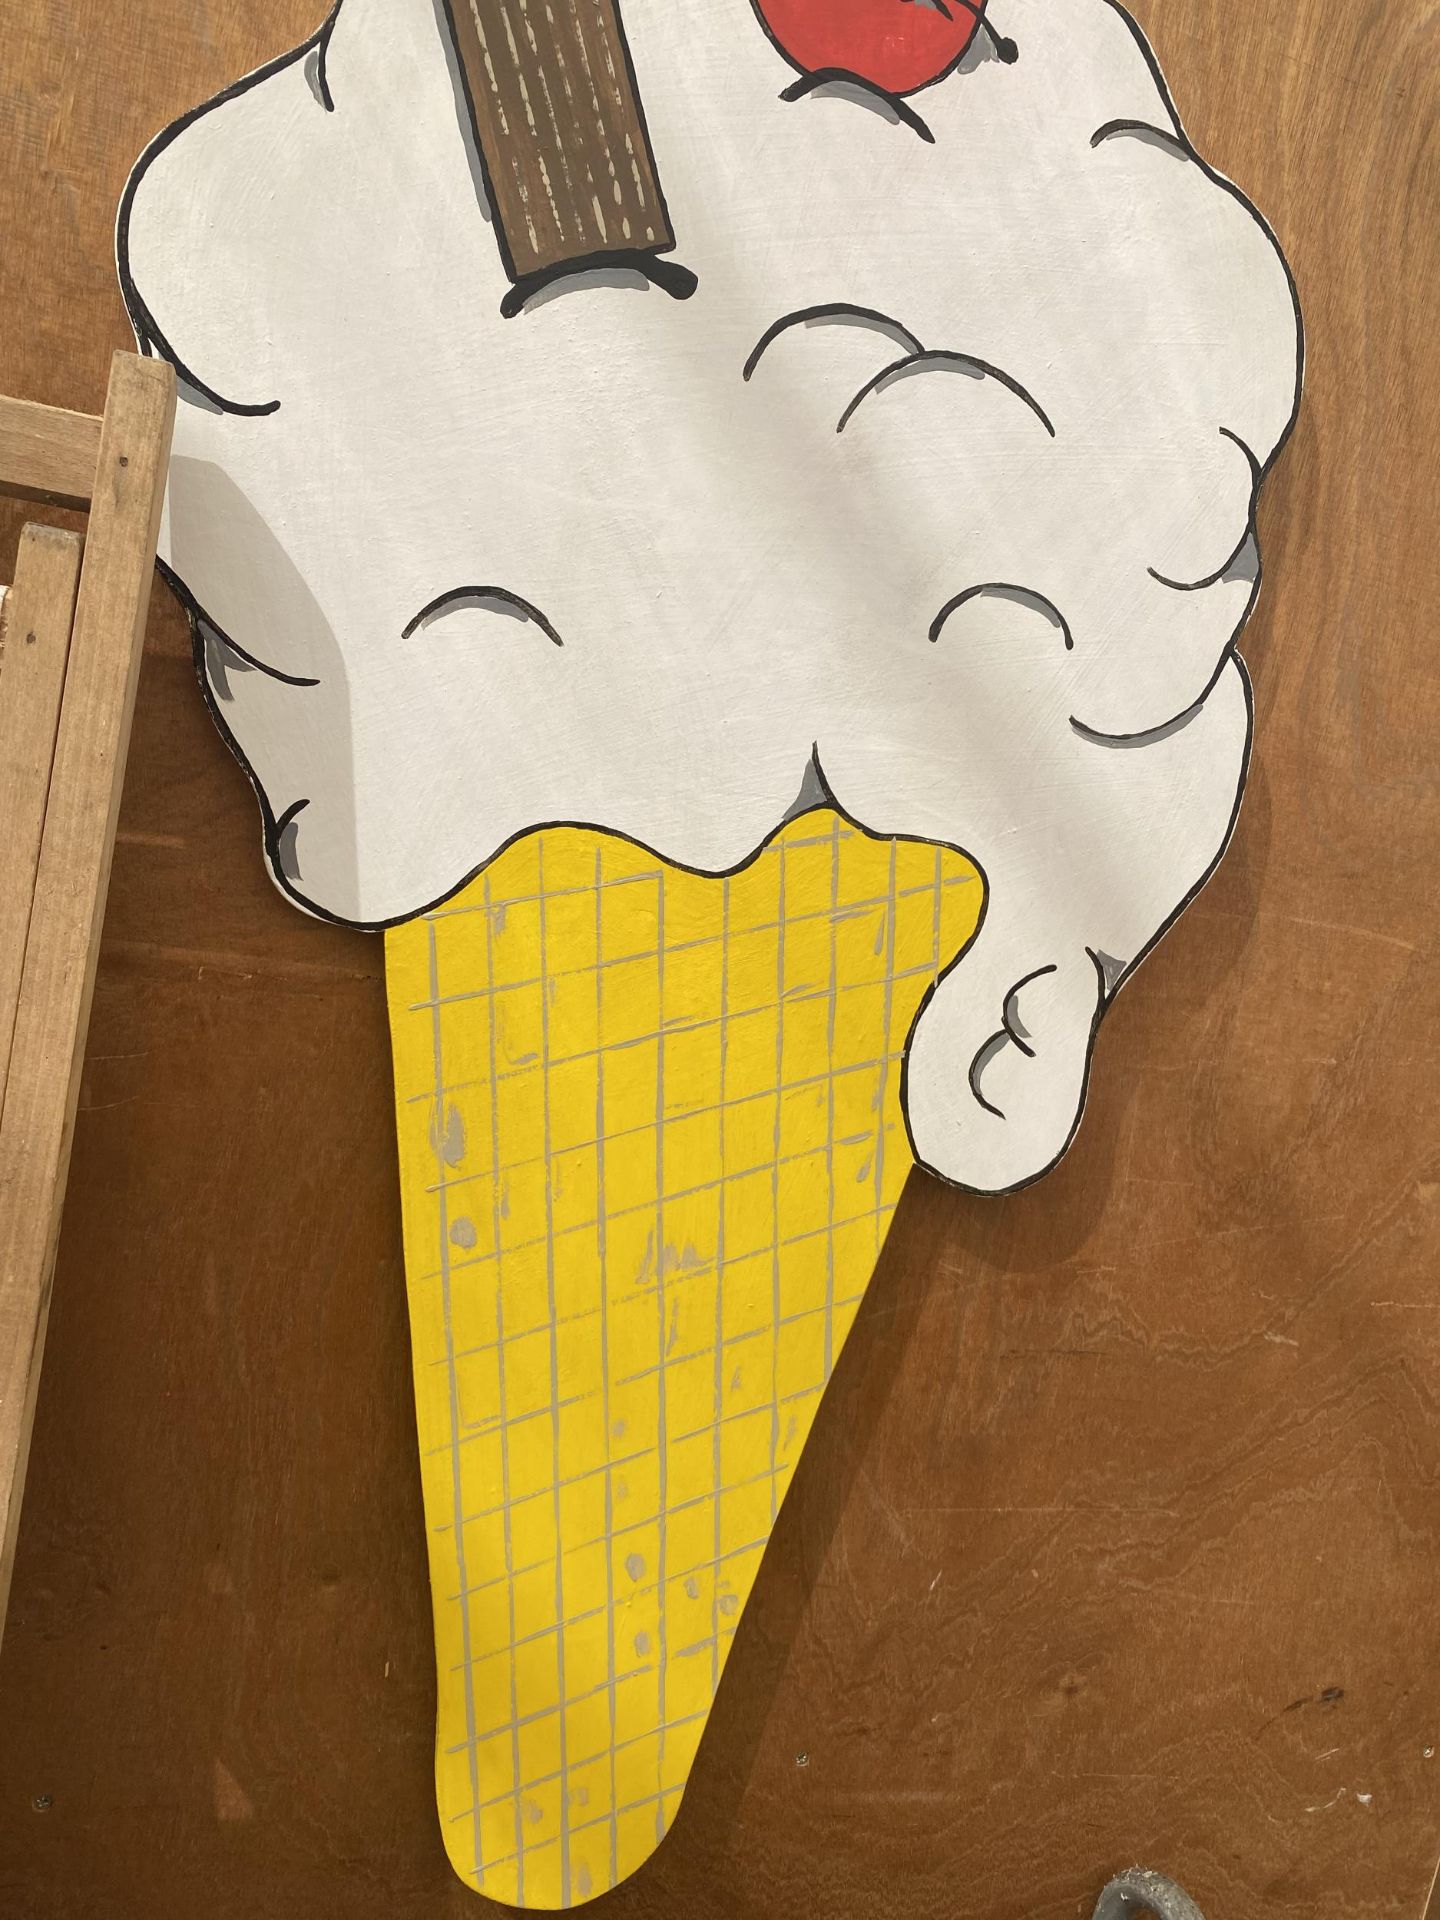 A PAINTED WOODEN ICE CREAM SHOP DISPLAY SIGN - Image 3 of 4